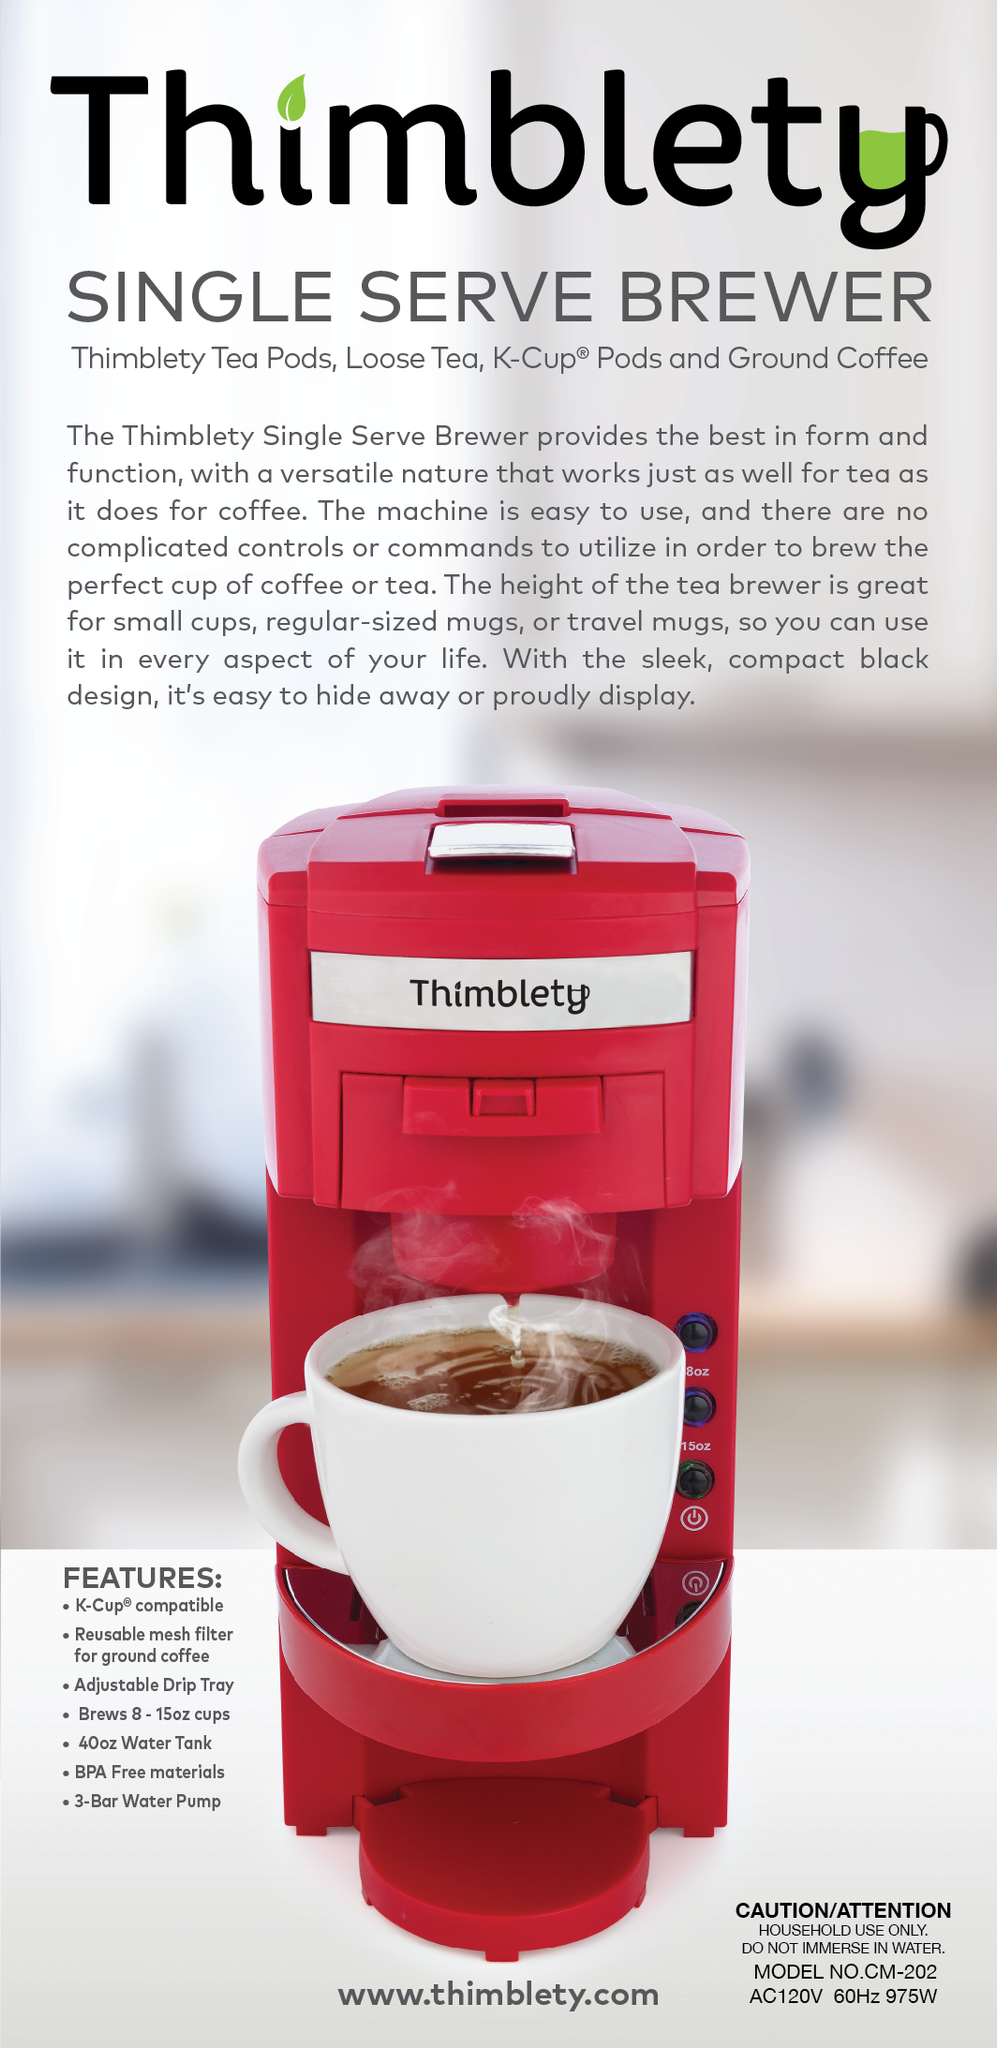 Thimblety Red Brewer for K-Cup Drinks and Loose Leaf Tea Ground Coffee